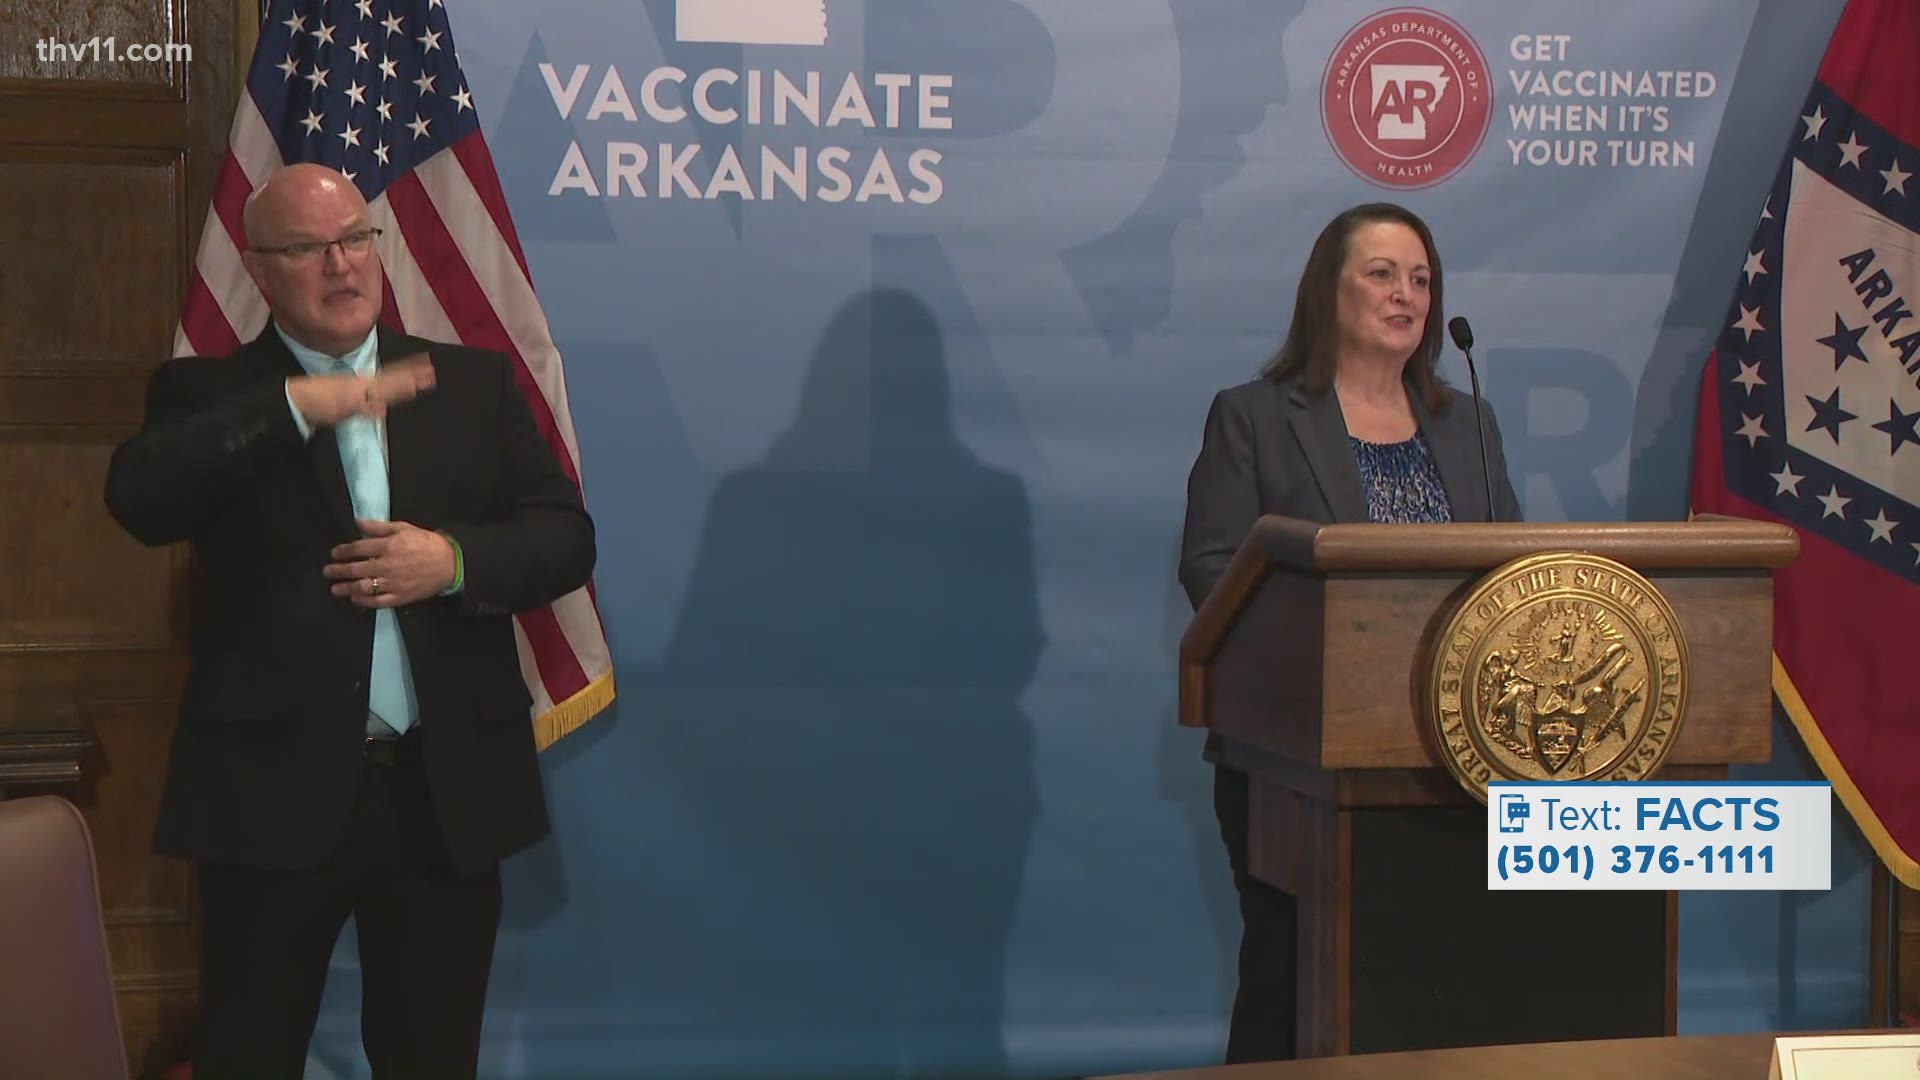 Dr. Margie Scott, with the Central Arkansas Veterans Healthcare System, announced all veterans aged 18+ with healthcare can now receive the vaccine.